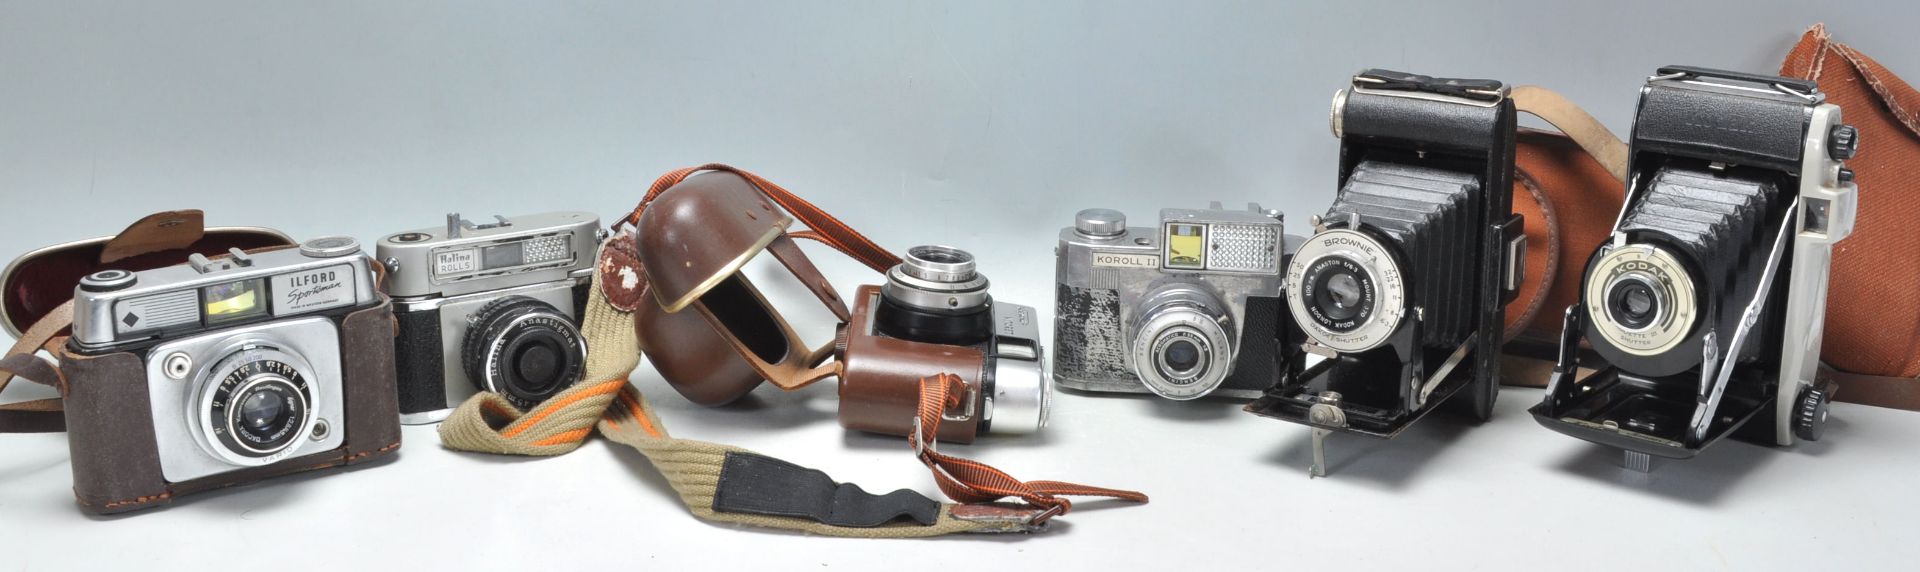 A collection of vintage film cameras to include an Ilford Sportsman, Halina Rolls, a Koroll II